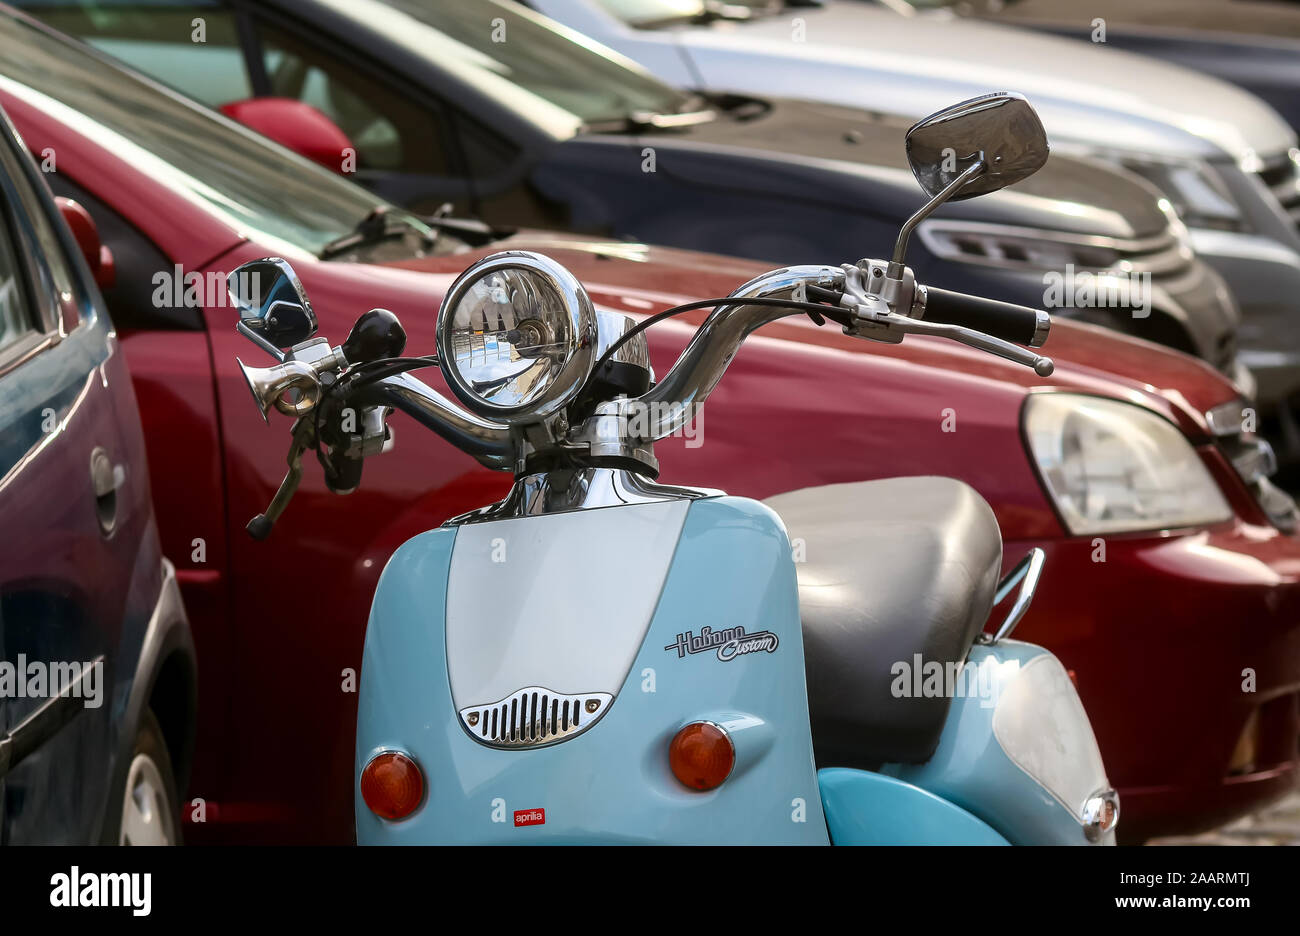 Bucharest, Romania - November 07, 2019: An Aprilia Habana Custom scooter is seen in front of several cars parked on a street in Bucharest. Stock Photo